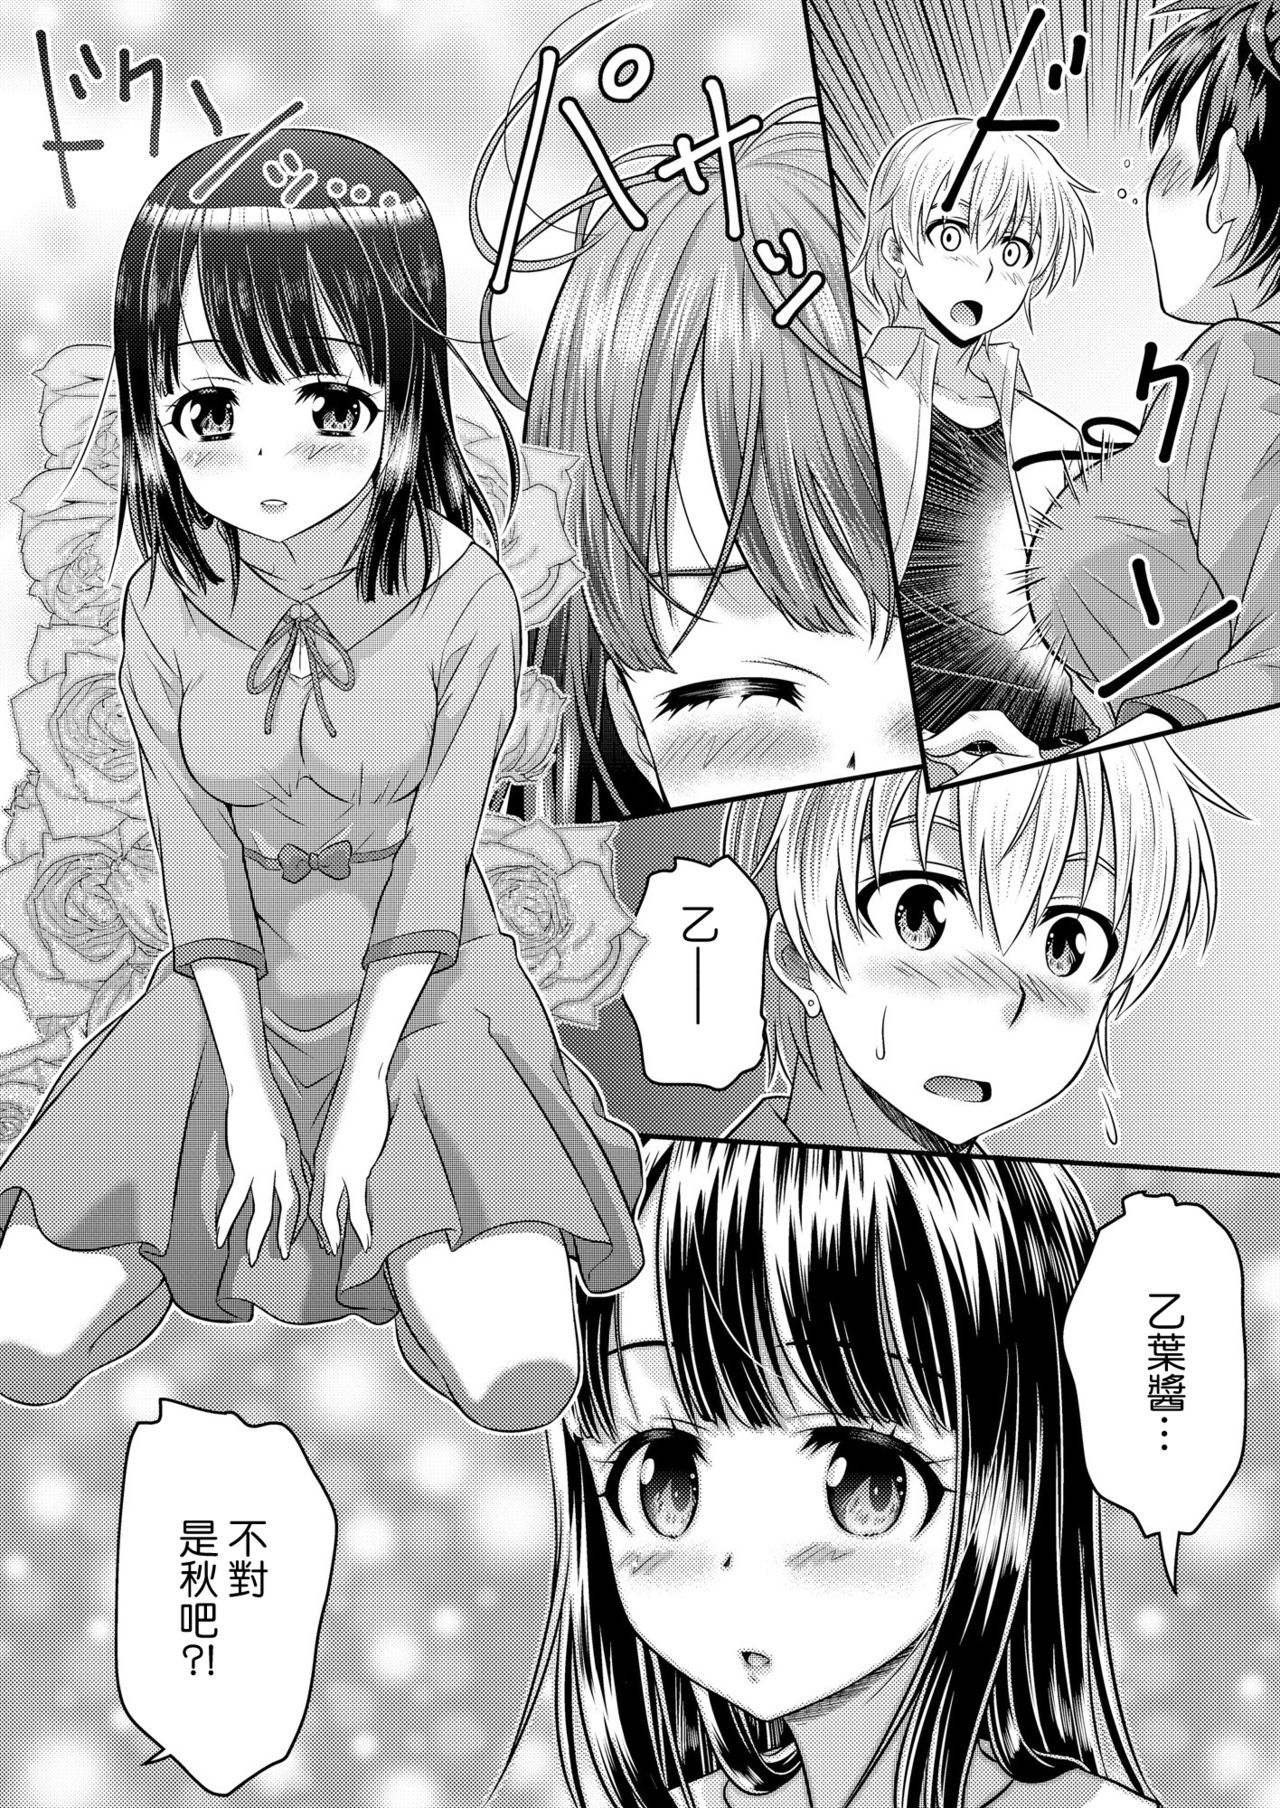 Metamorph ★ Coordination - I Become Whatever Girl I Crossdress As~ [Sister Arc, Classmate Arc] [Chinese] [瑞树汉化组] page 25 full